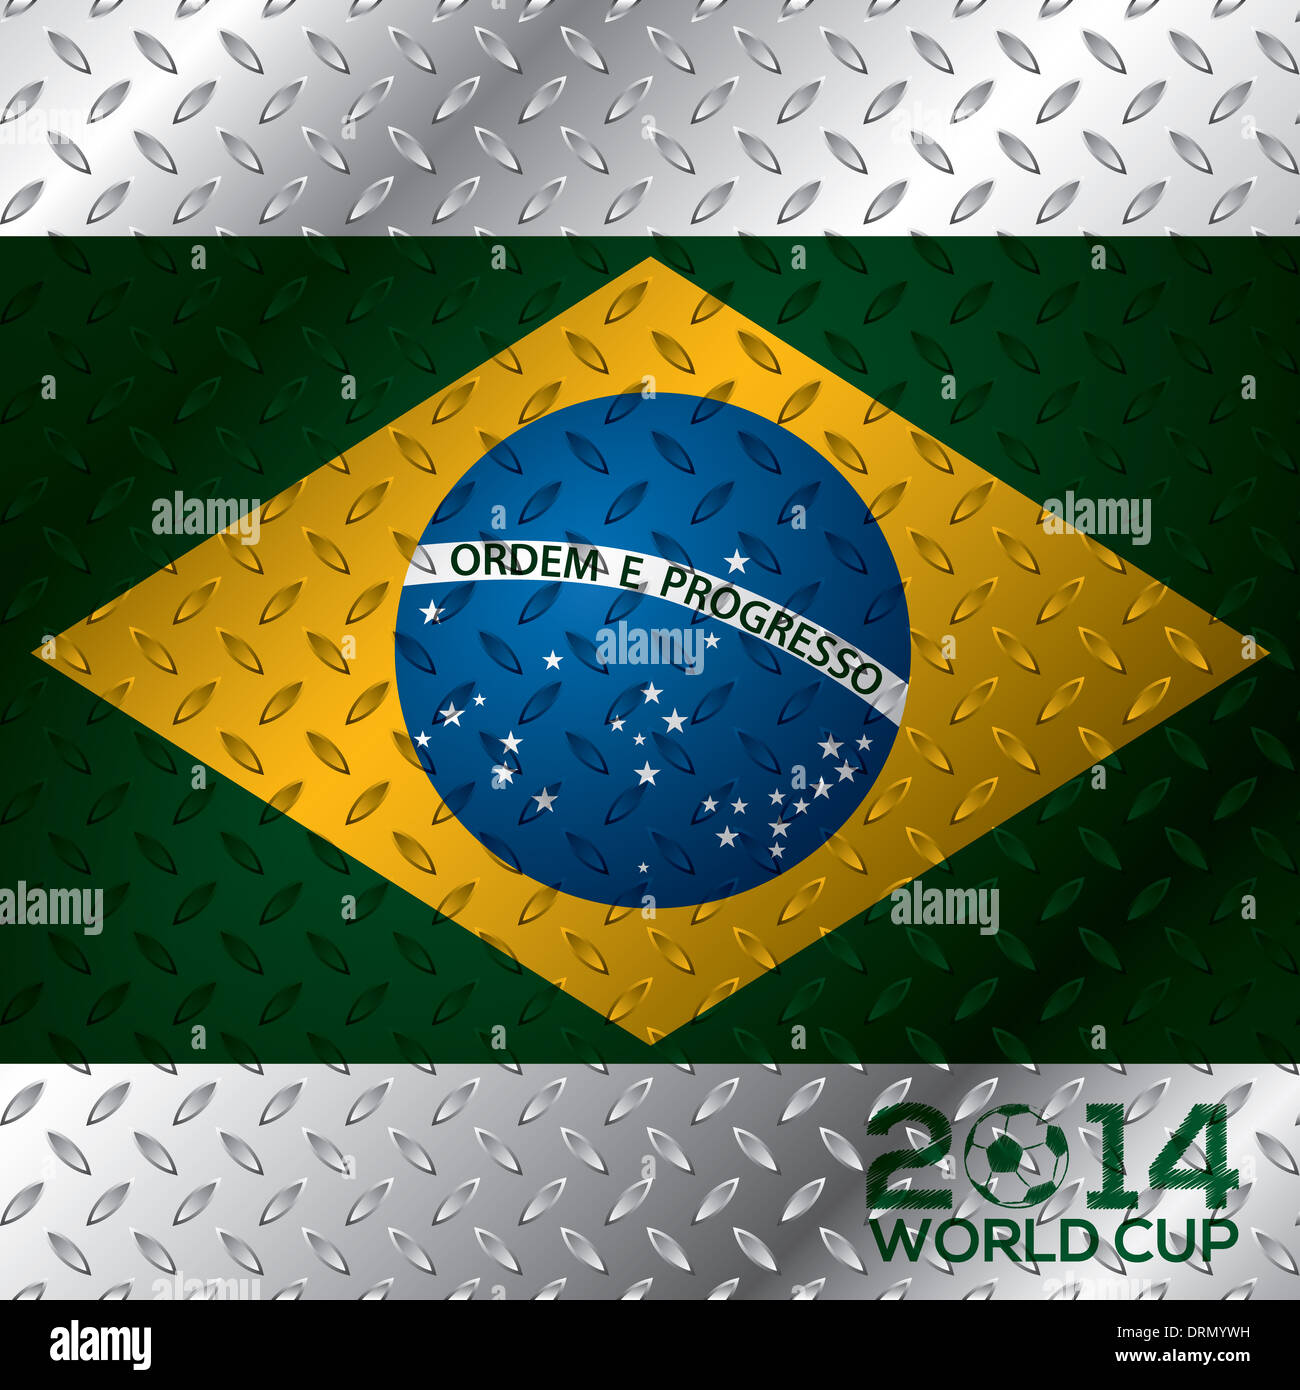 Abstract 2014 world cup poster on metallic plate Stock Photo